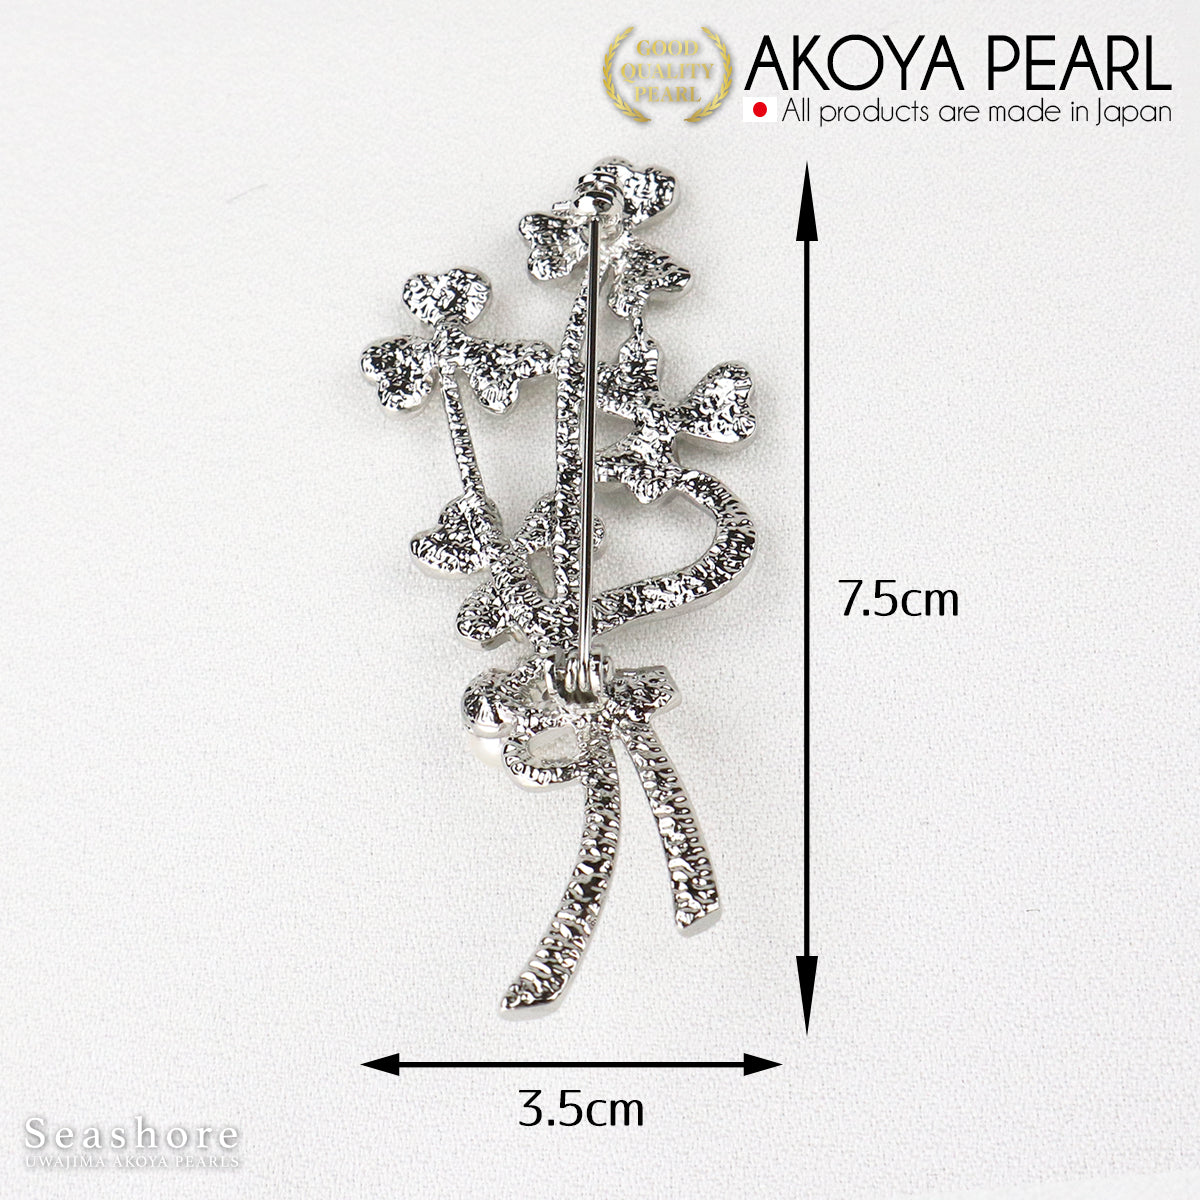 Pearl Brooch Bouquet Ribbon Flower Brass White 5.0-6.5mm Akoya Pearl with Storage Case (3505)